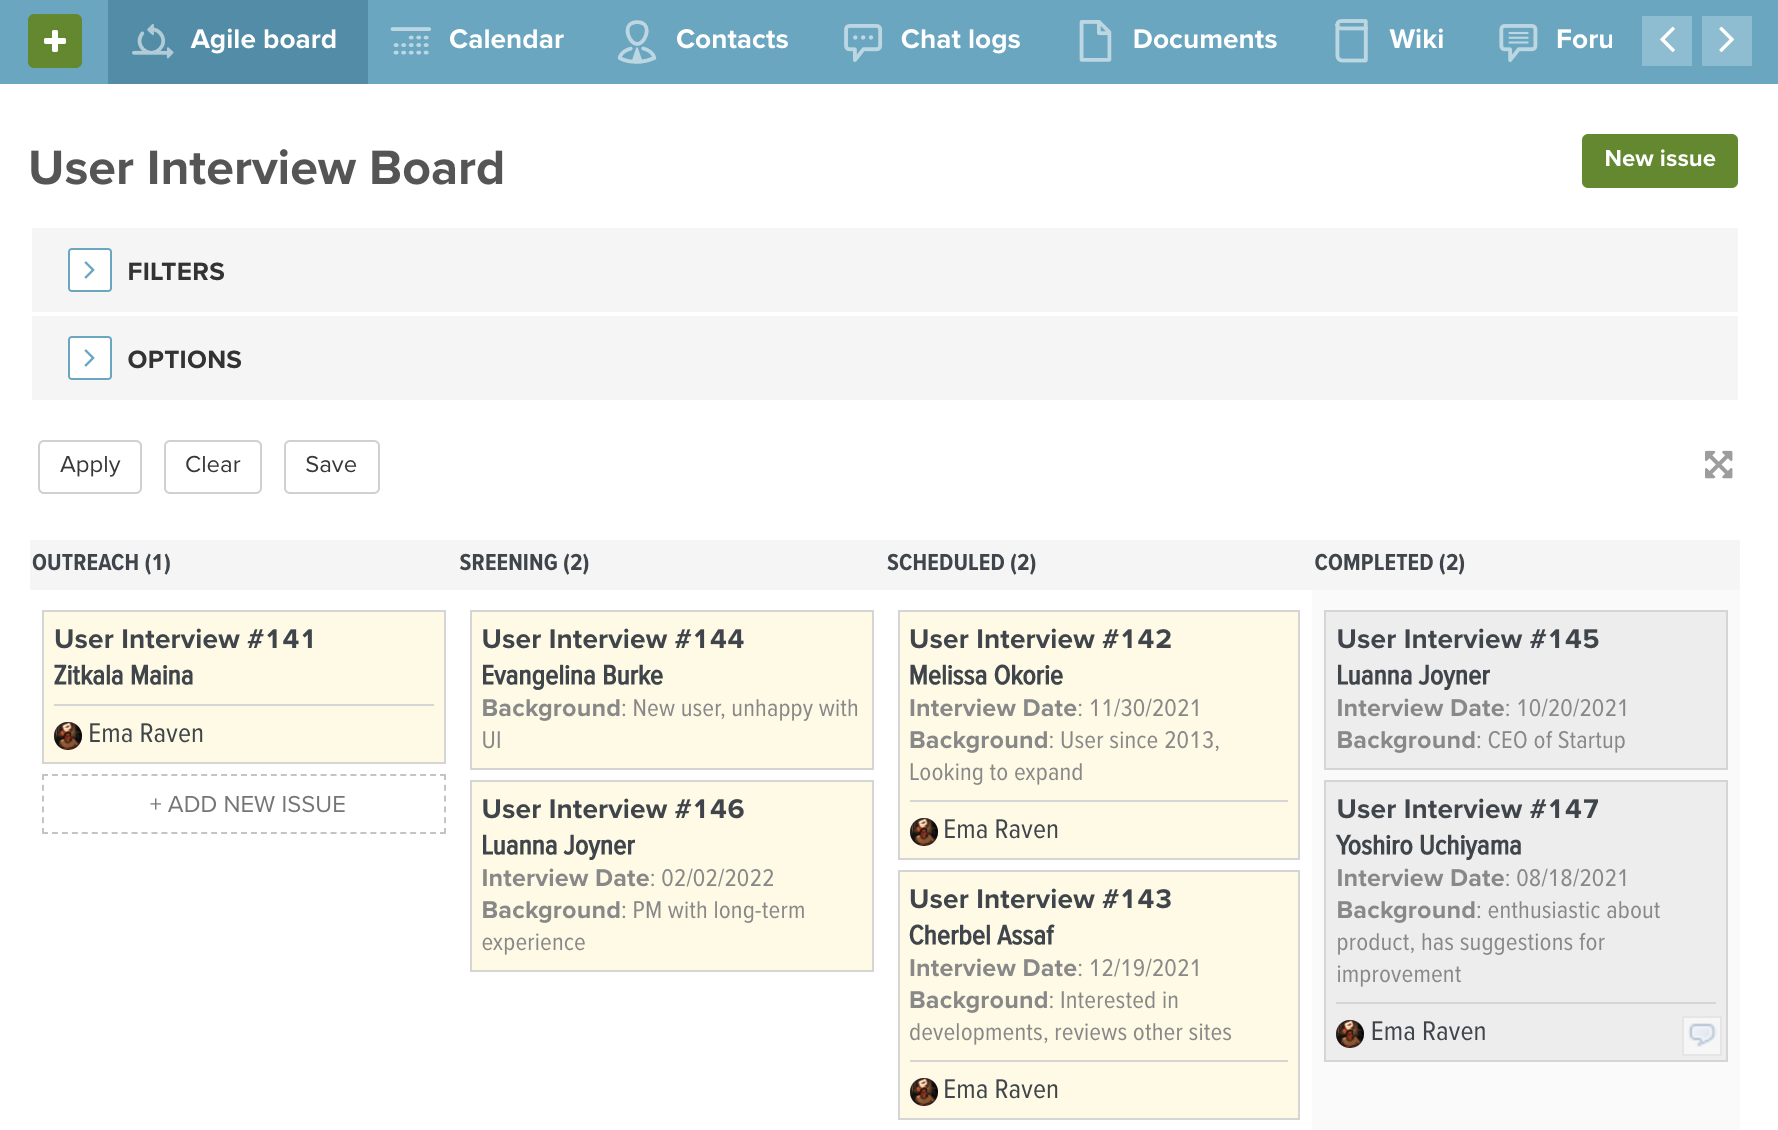 Screenshot of Planio showing an Agile board used for keeping track of user interviews. The tiles show the name, interview date and personal background